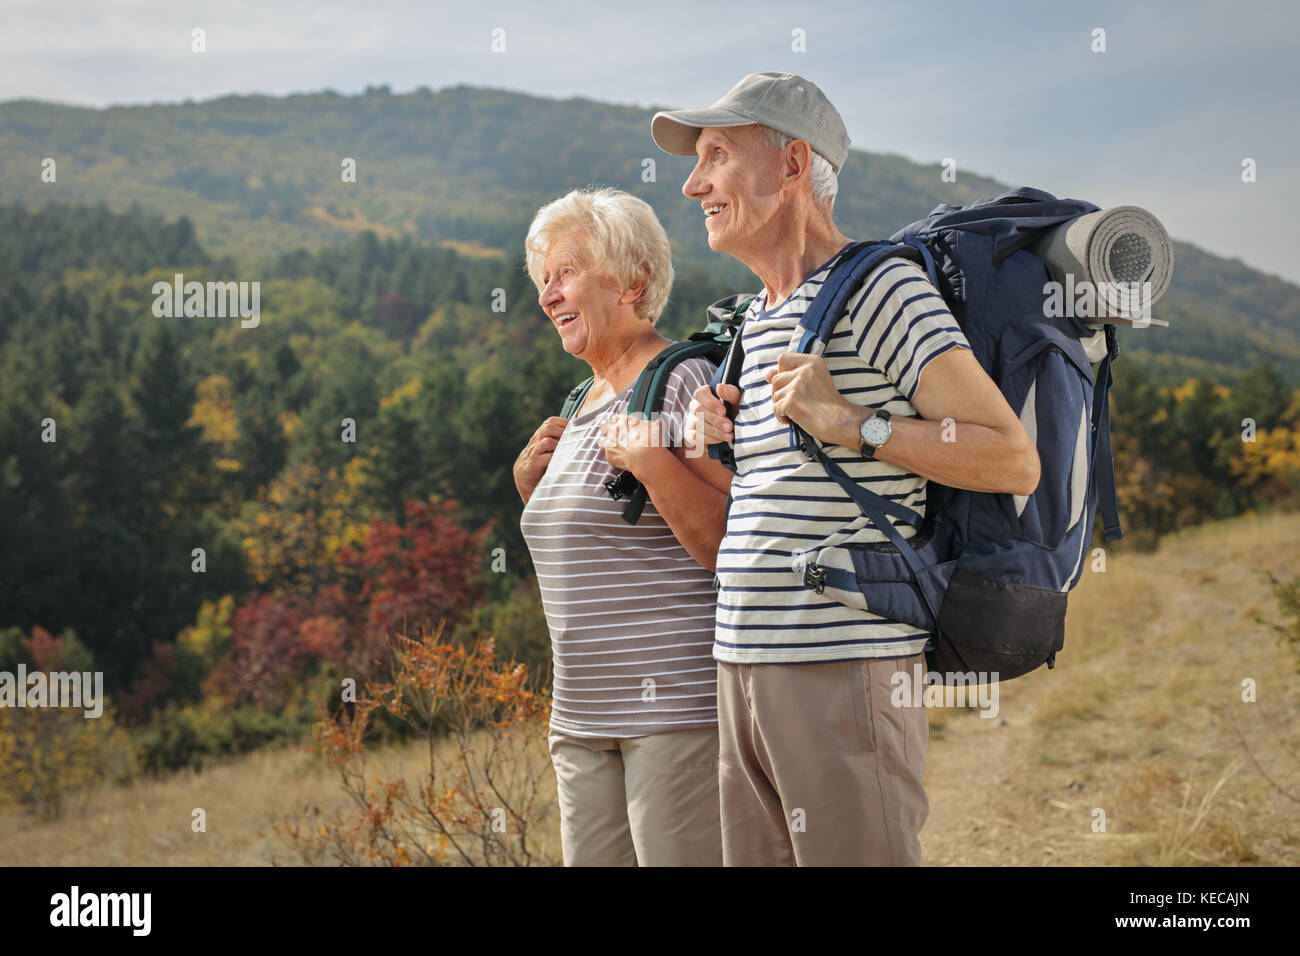 Two elderly hikers looking away outdoors Stock Photo